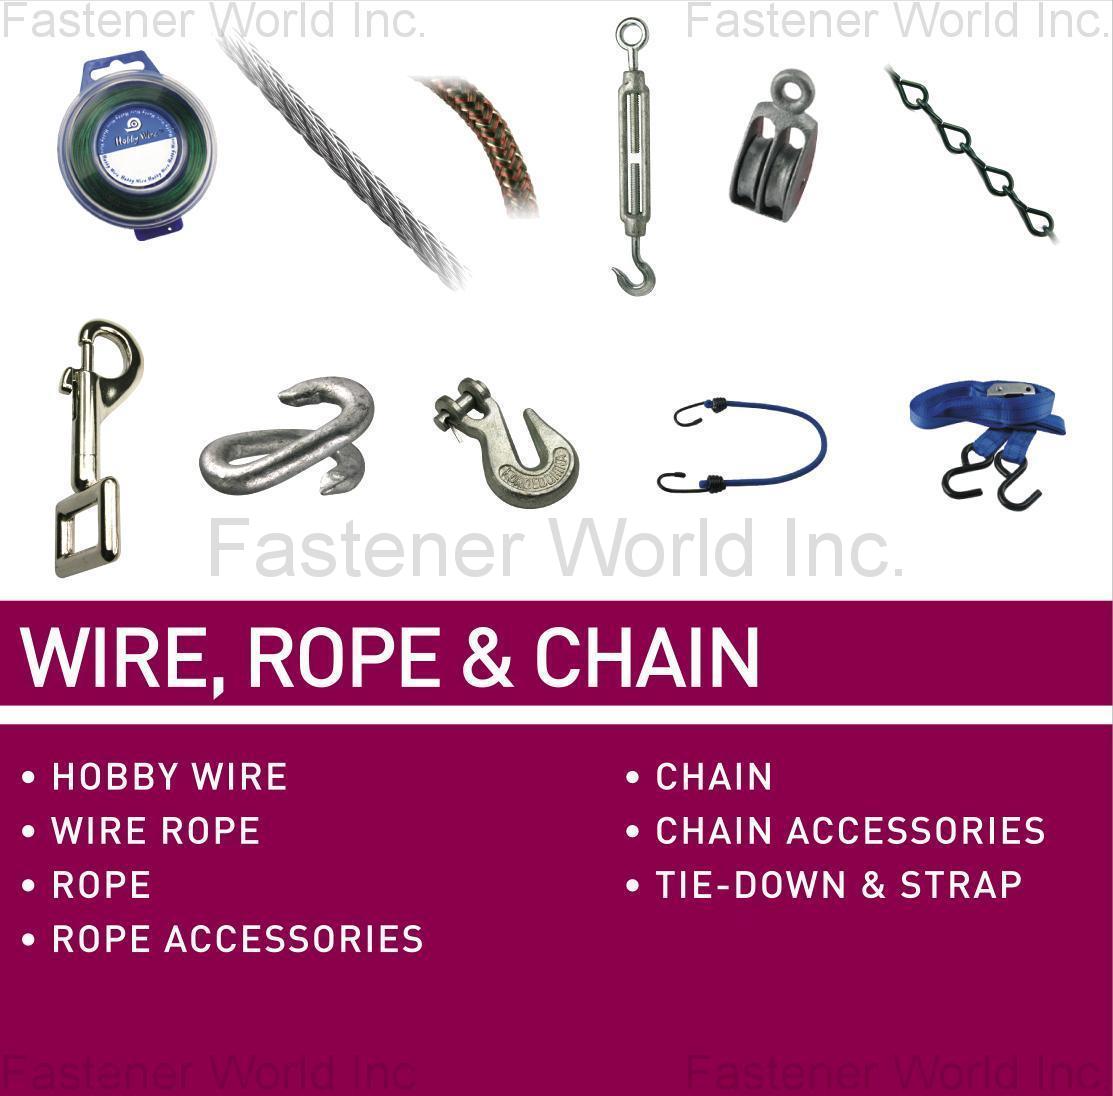 FAITHFUL ENG. PRODS. CO., LTD.  , WIRE, ROPE & CHAIN, HOBBY WIRE, WIRE ROPE, ROPE, ROPE ACCESSORIES, CHAIN, CHAIN ACCESSORIES, TIE-DOWN & STRAP , Pulleys